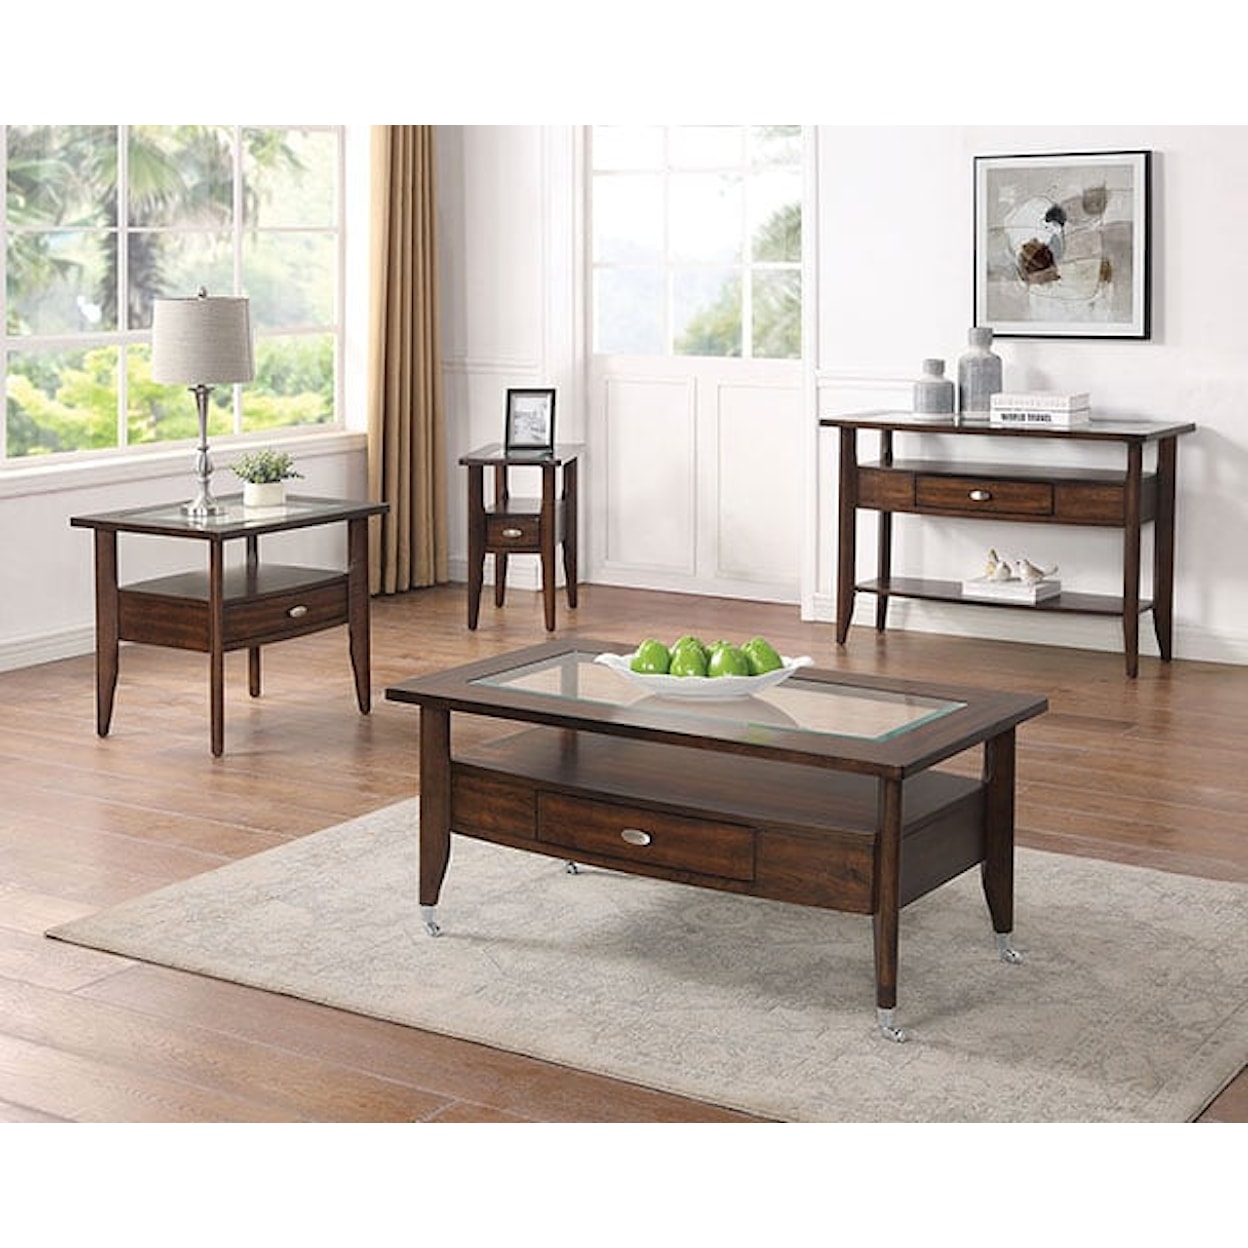 Furniture of America Riverdale  Dark Walnut Coffee Table with Glass Top